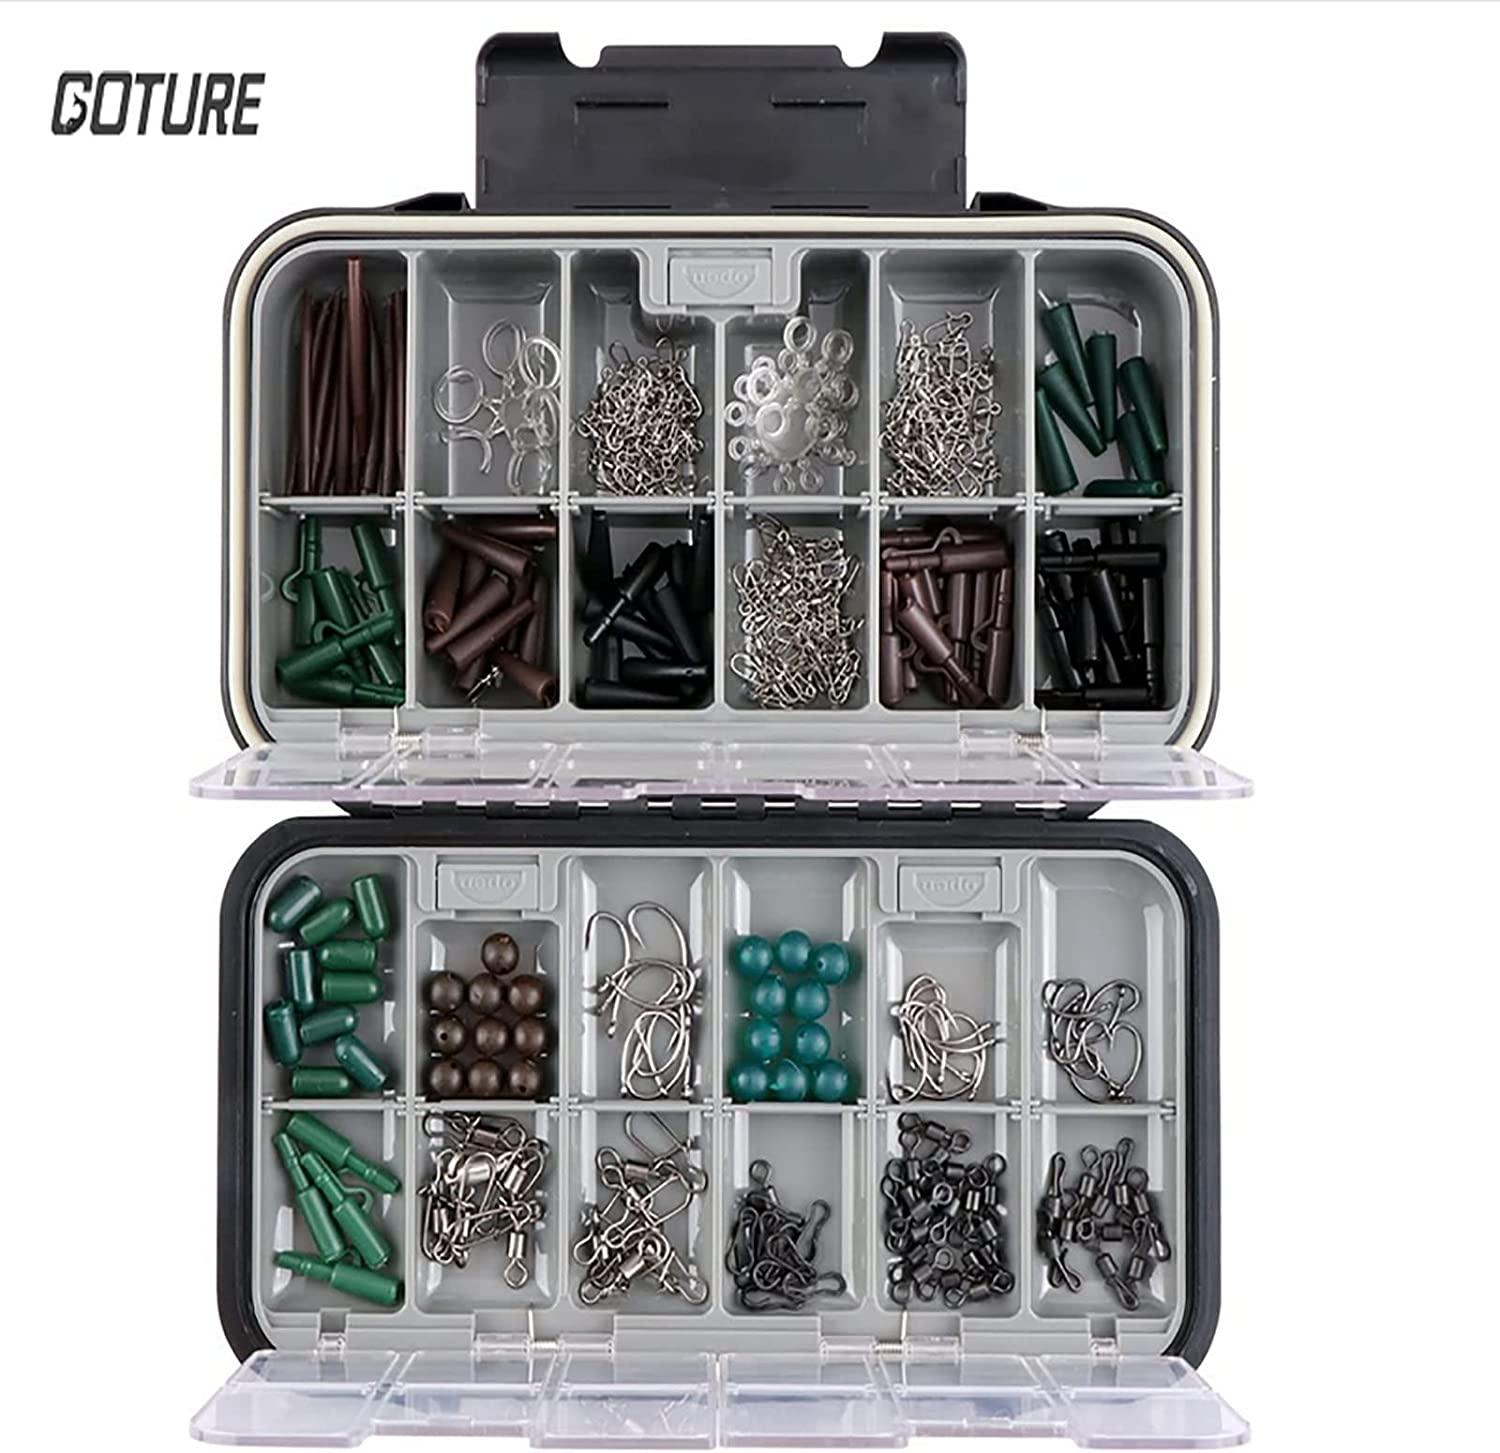 Goture Waterproof//2-sided//Fishing-Lure-Boxes-Bait,Small-Case, Mini-Box  Storage Containers NEW TYPE Large/Black